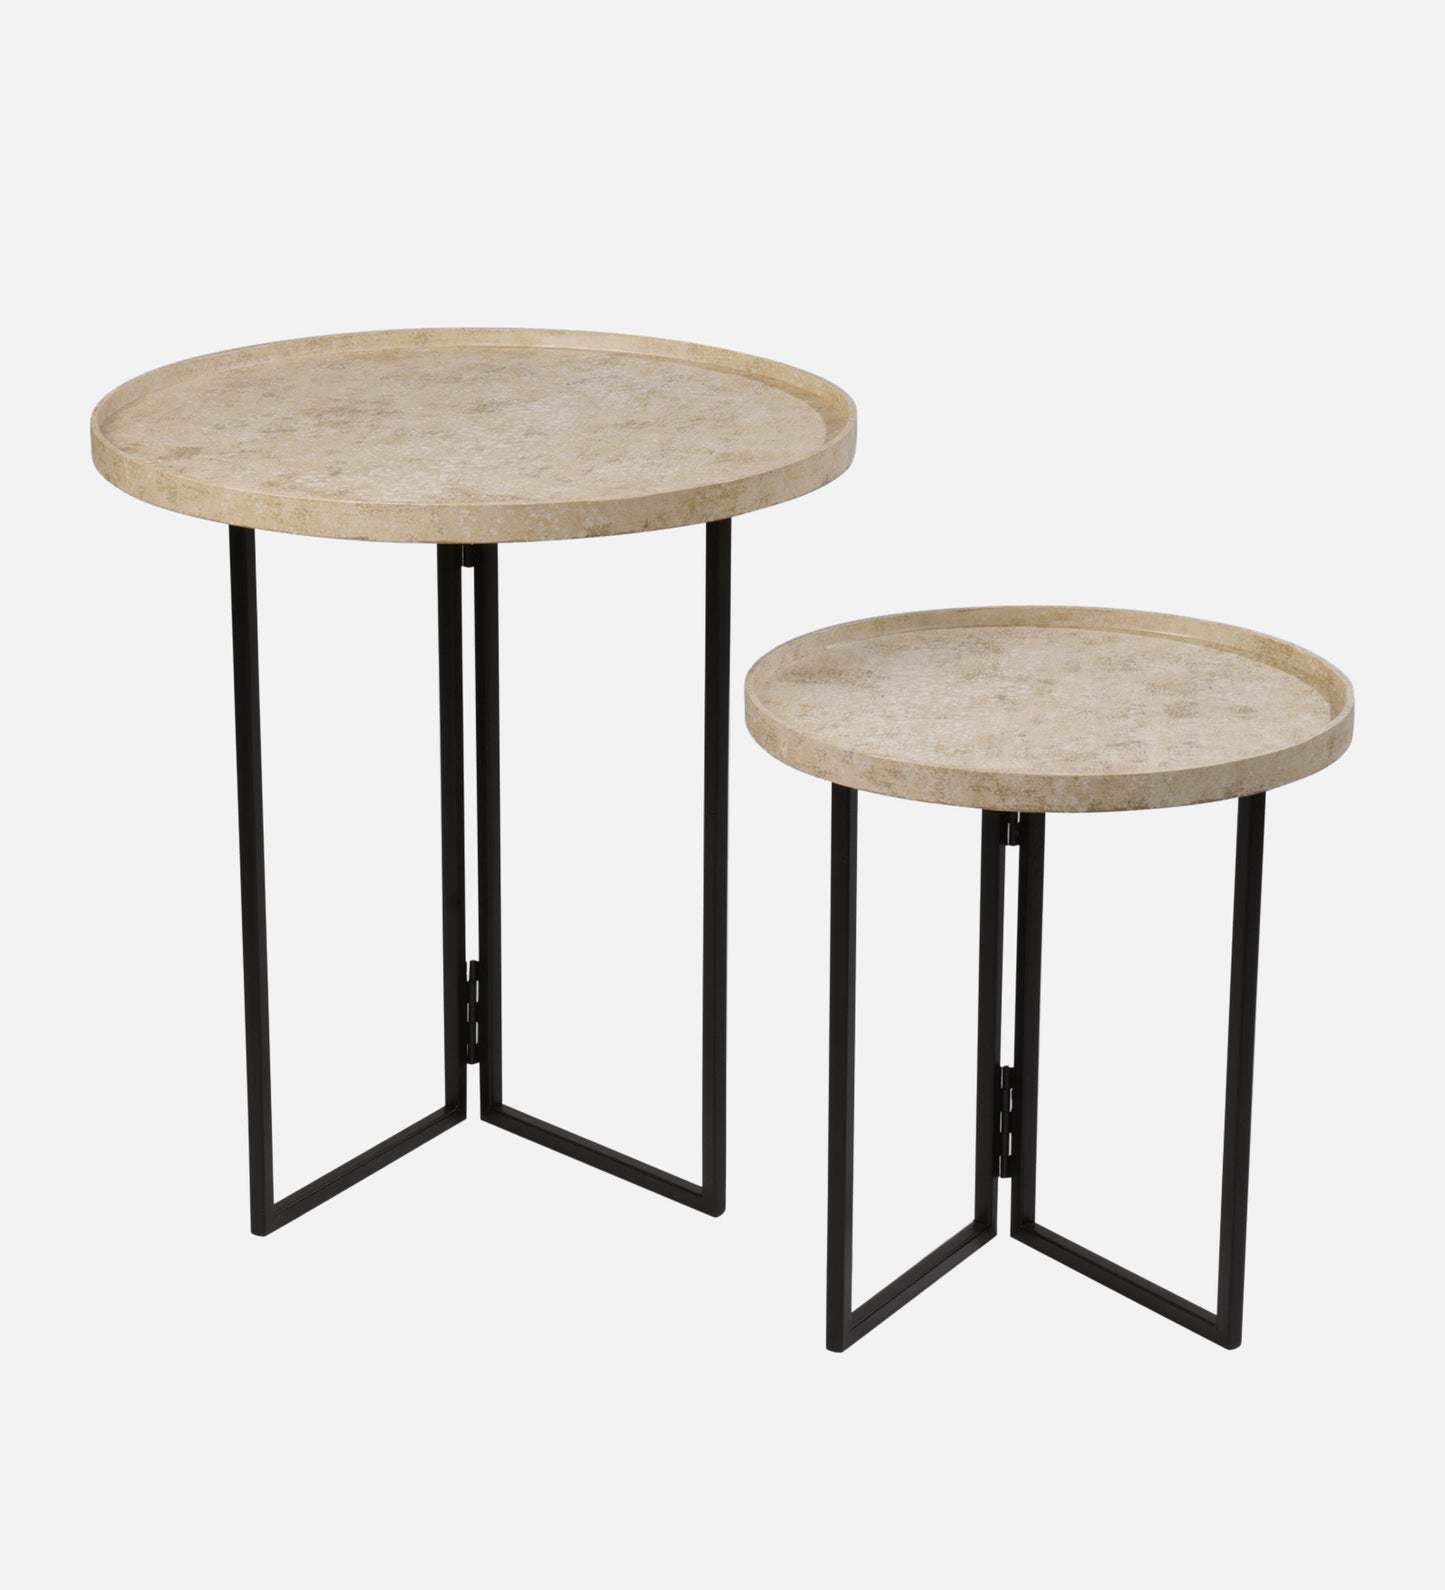 Transcendent Tinge Light Gold Round Oblique Nesting Tables, Side Tables, Wooden Tables, Living Room Decor by A Tiny Mistake